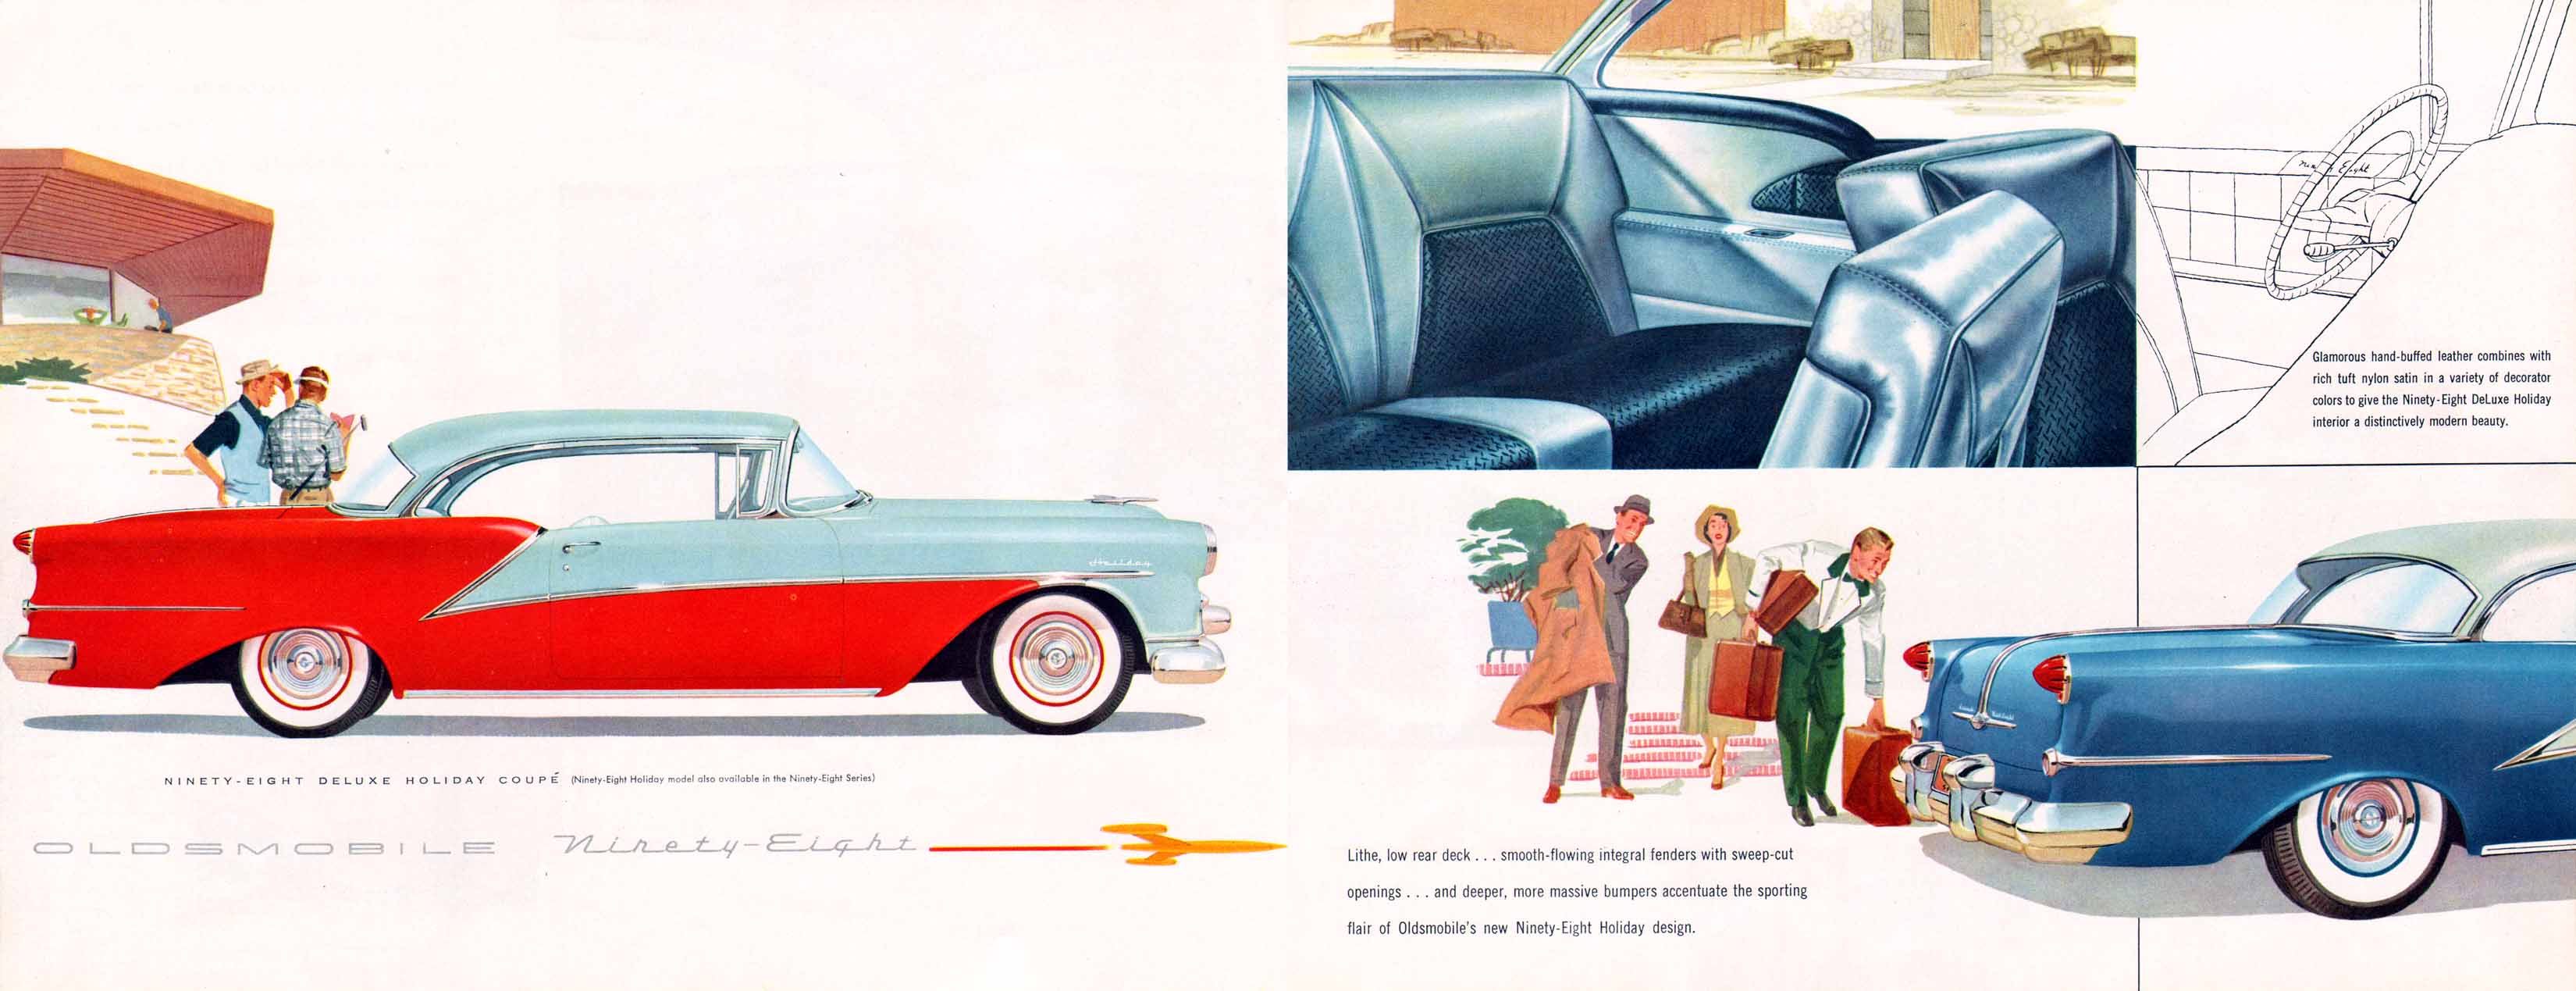 1954_Oldsmobile-a13-a14